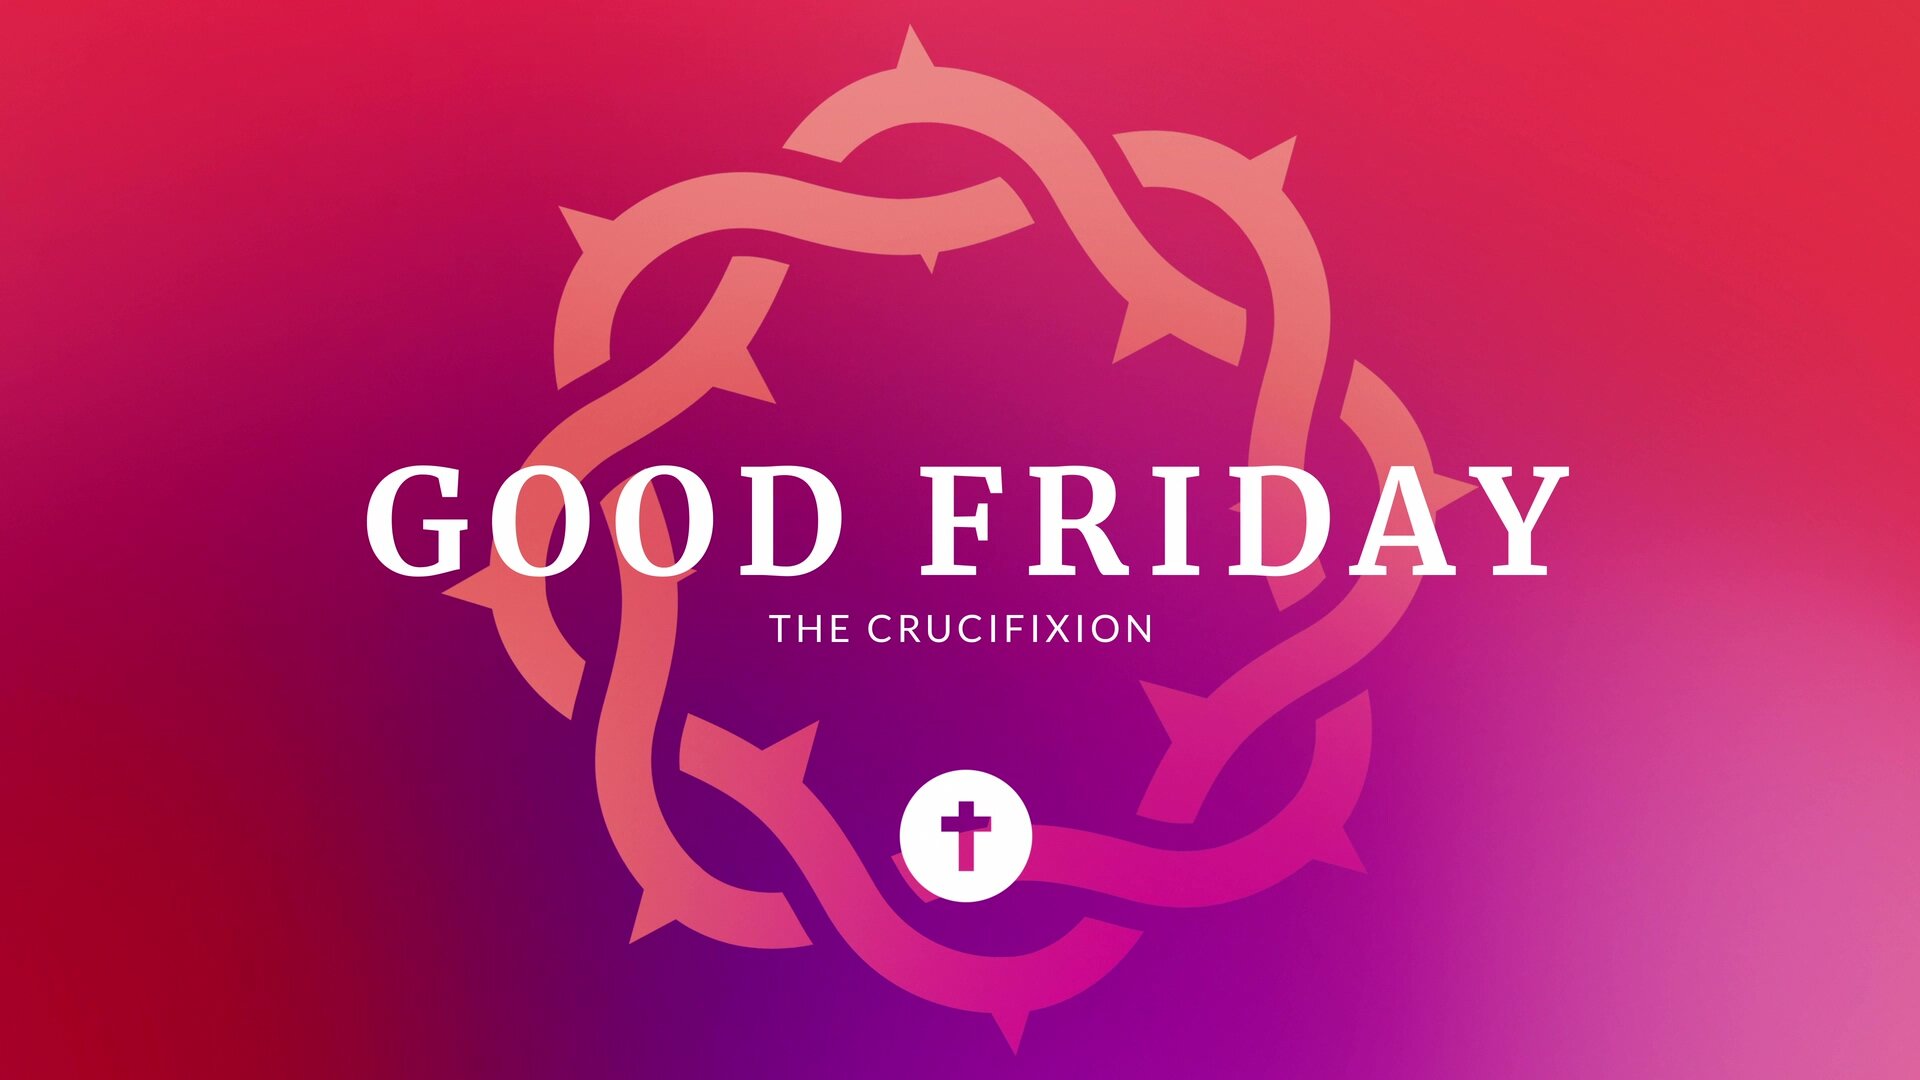 Join us tonight for a Good Friday service. As we remember that Jesus paid it all. See you at 6pm tonight #hillcrestyouth #hillcrestnaz